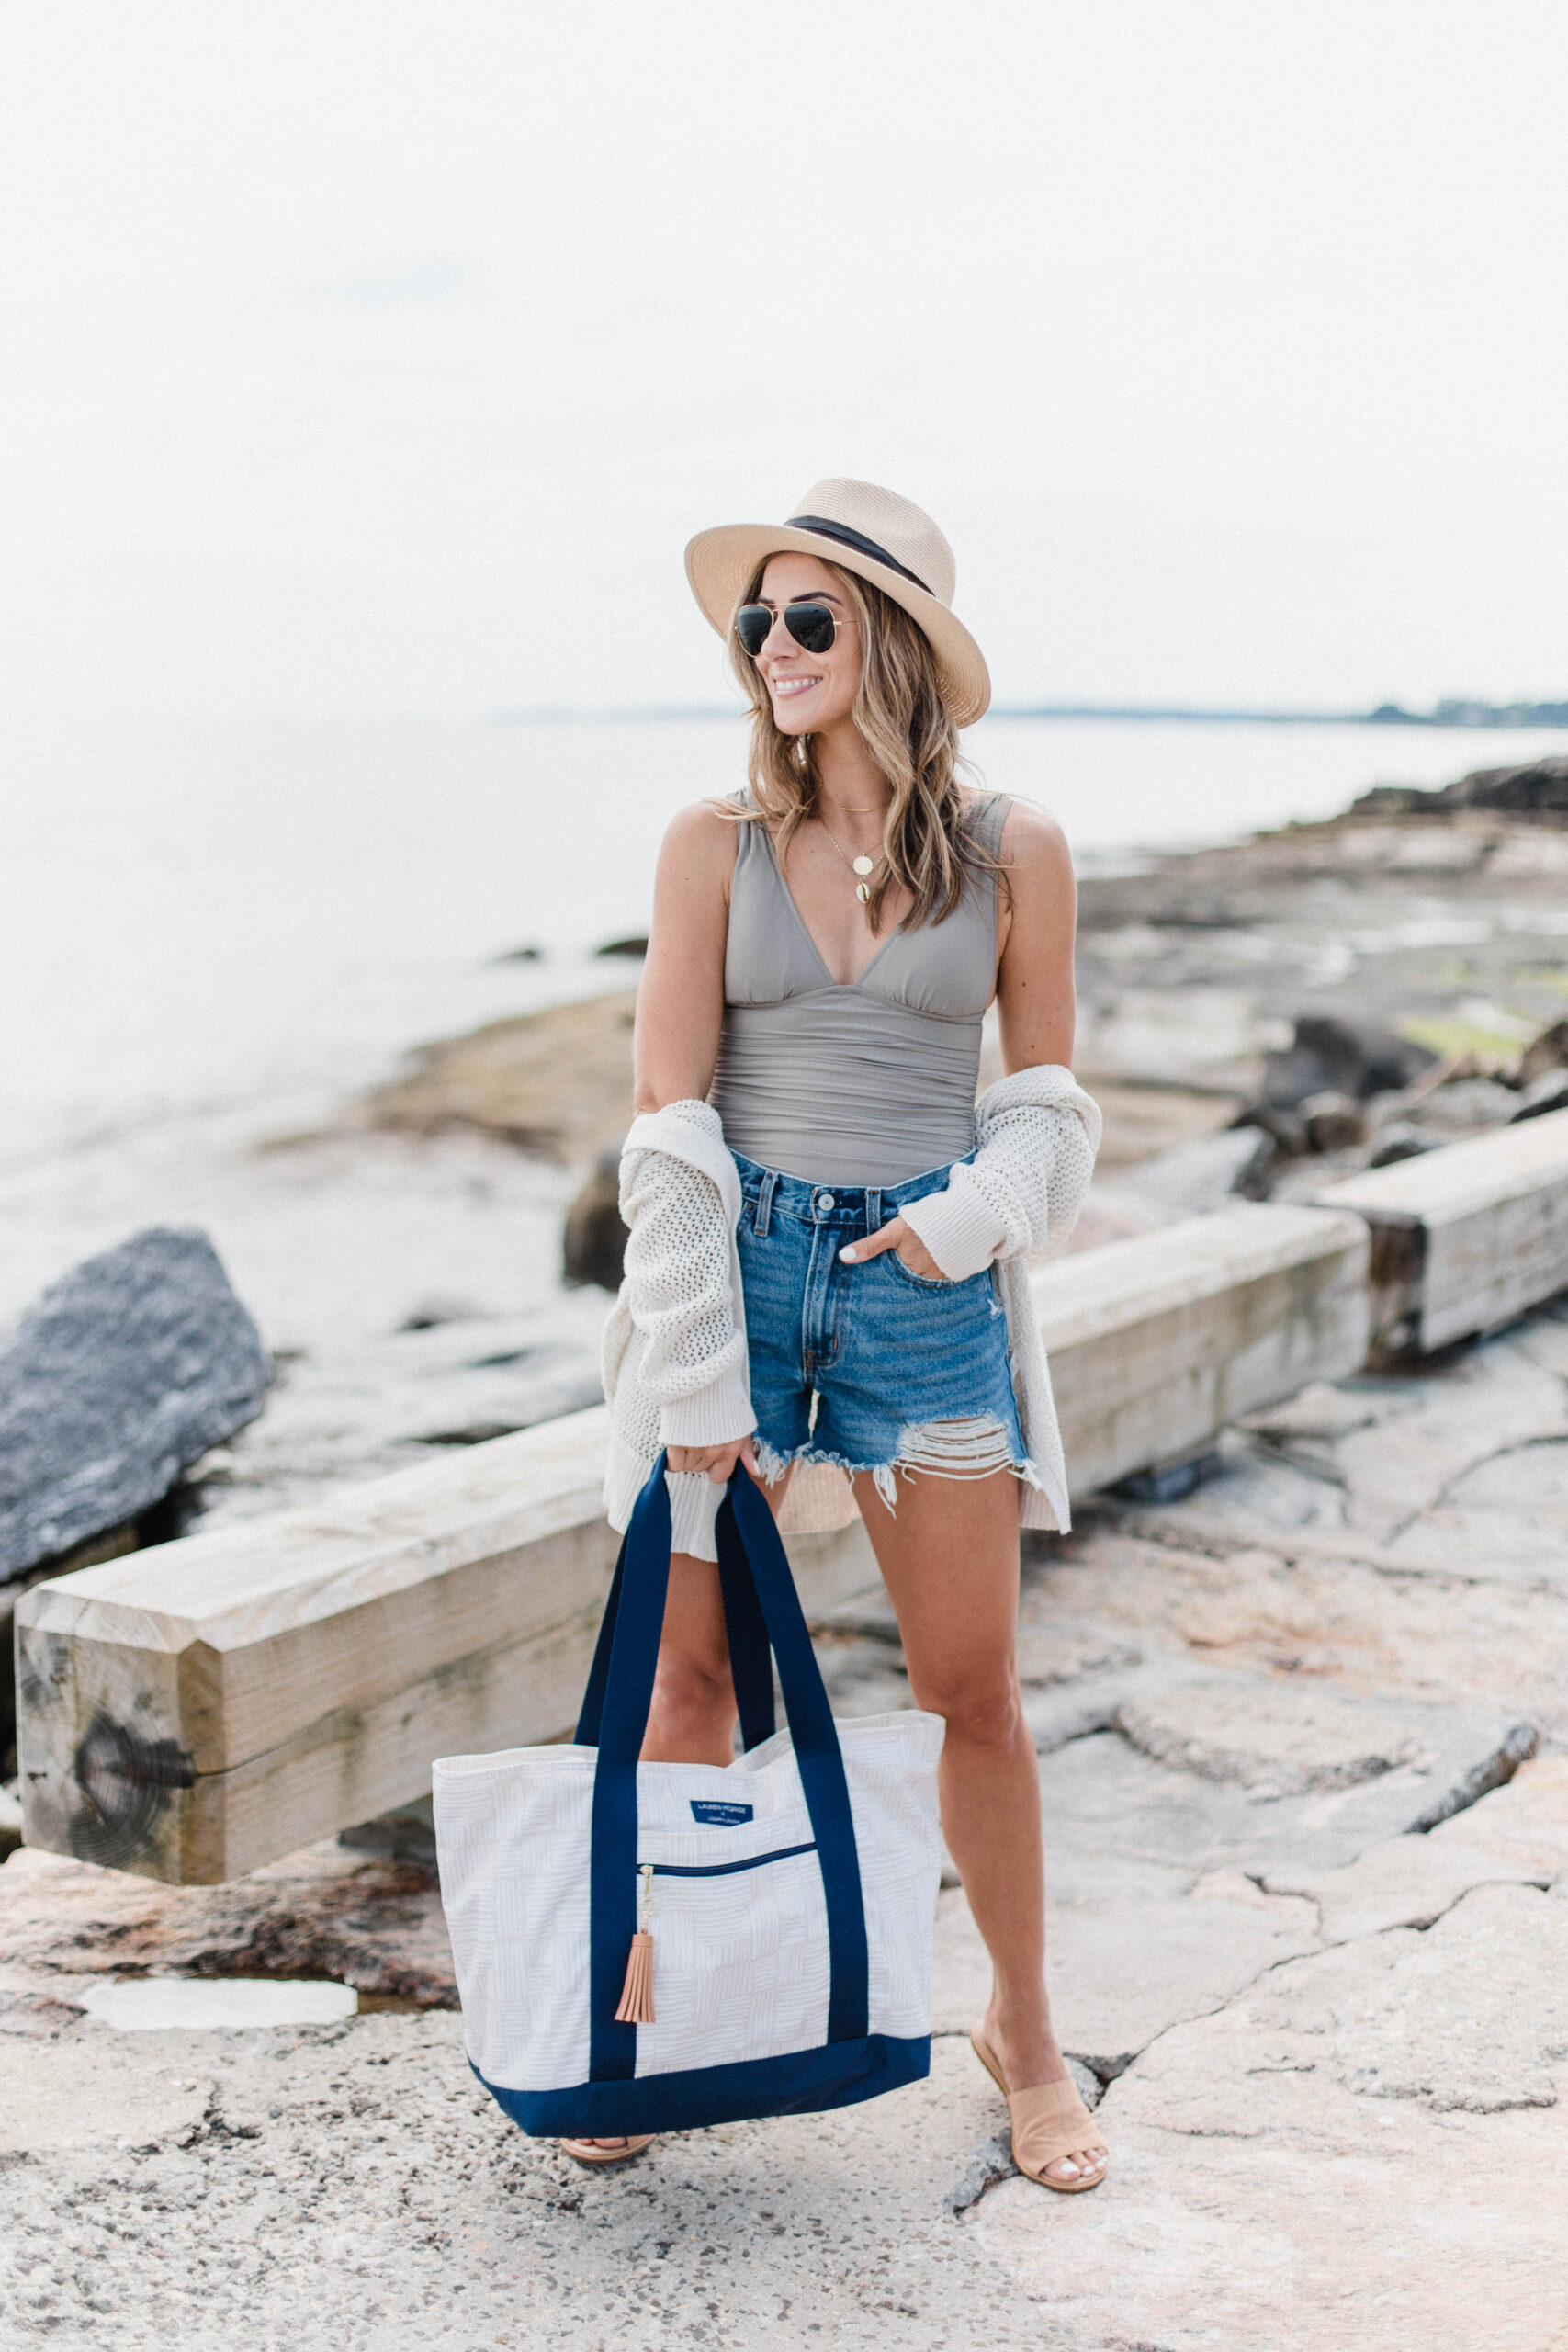 Connecticut life and style blogger Lauren McBride shares her newest launch with Logan and Lenora, featuring a basketweave print style.